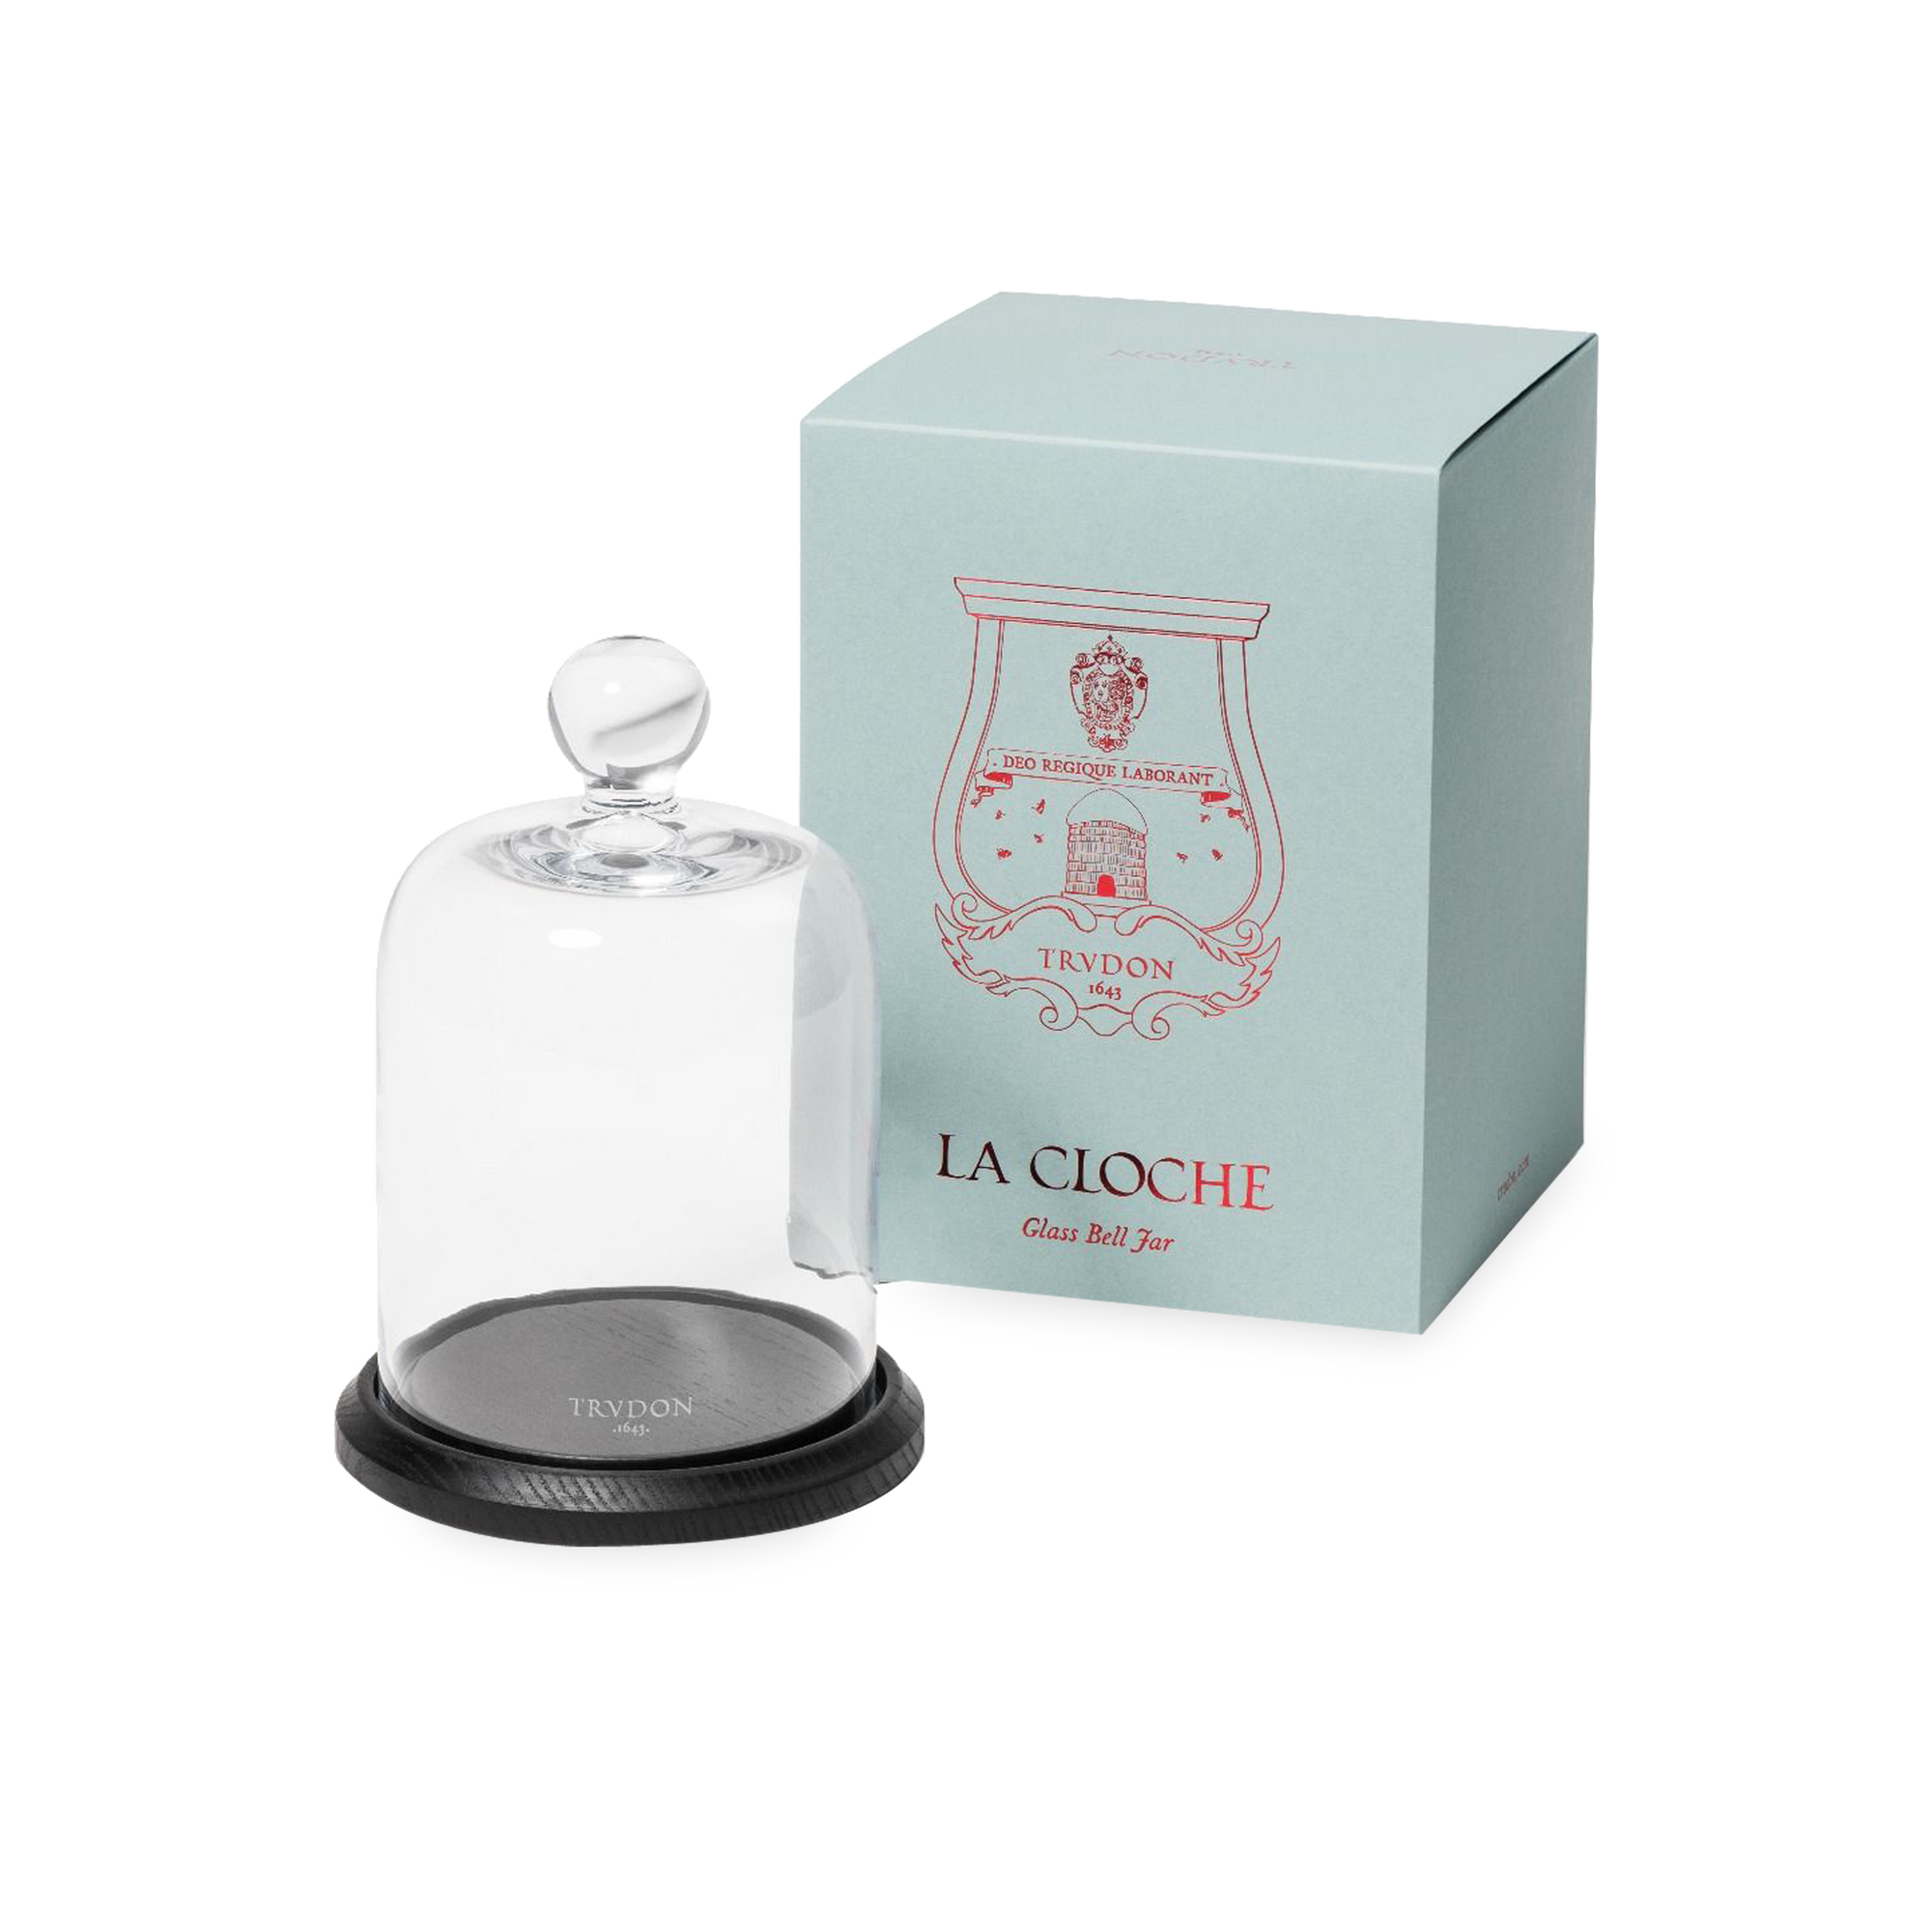 Inspired by the traditional wedding cloche, La Cloche Bell Jar and Tray have become of an important house ritual for the Cire Trudon brand as they are carefully lifted to reveal th